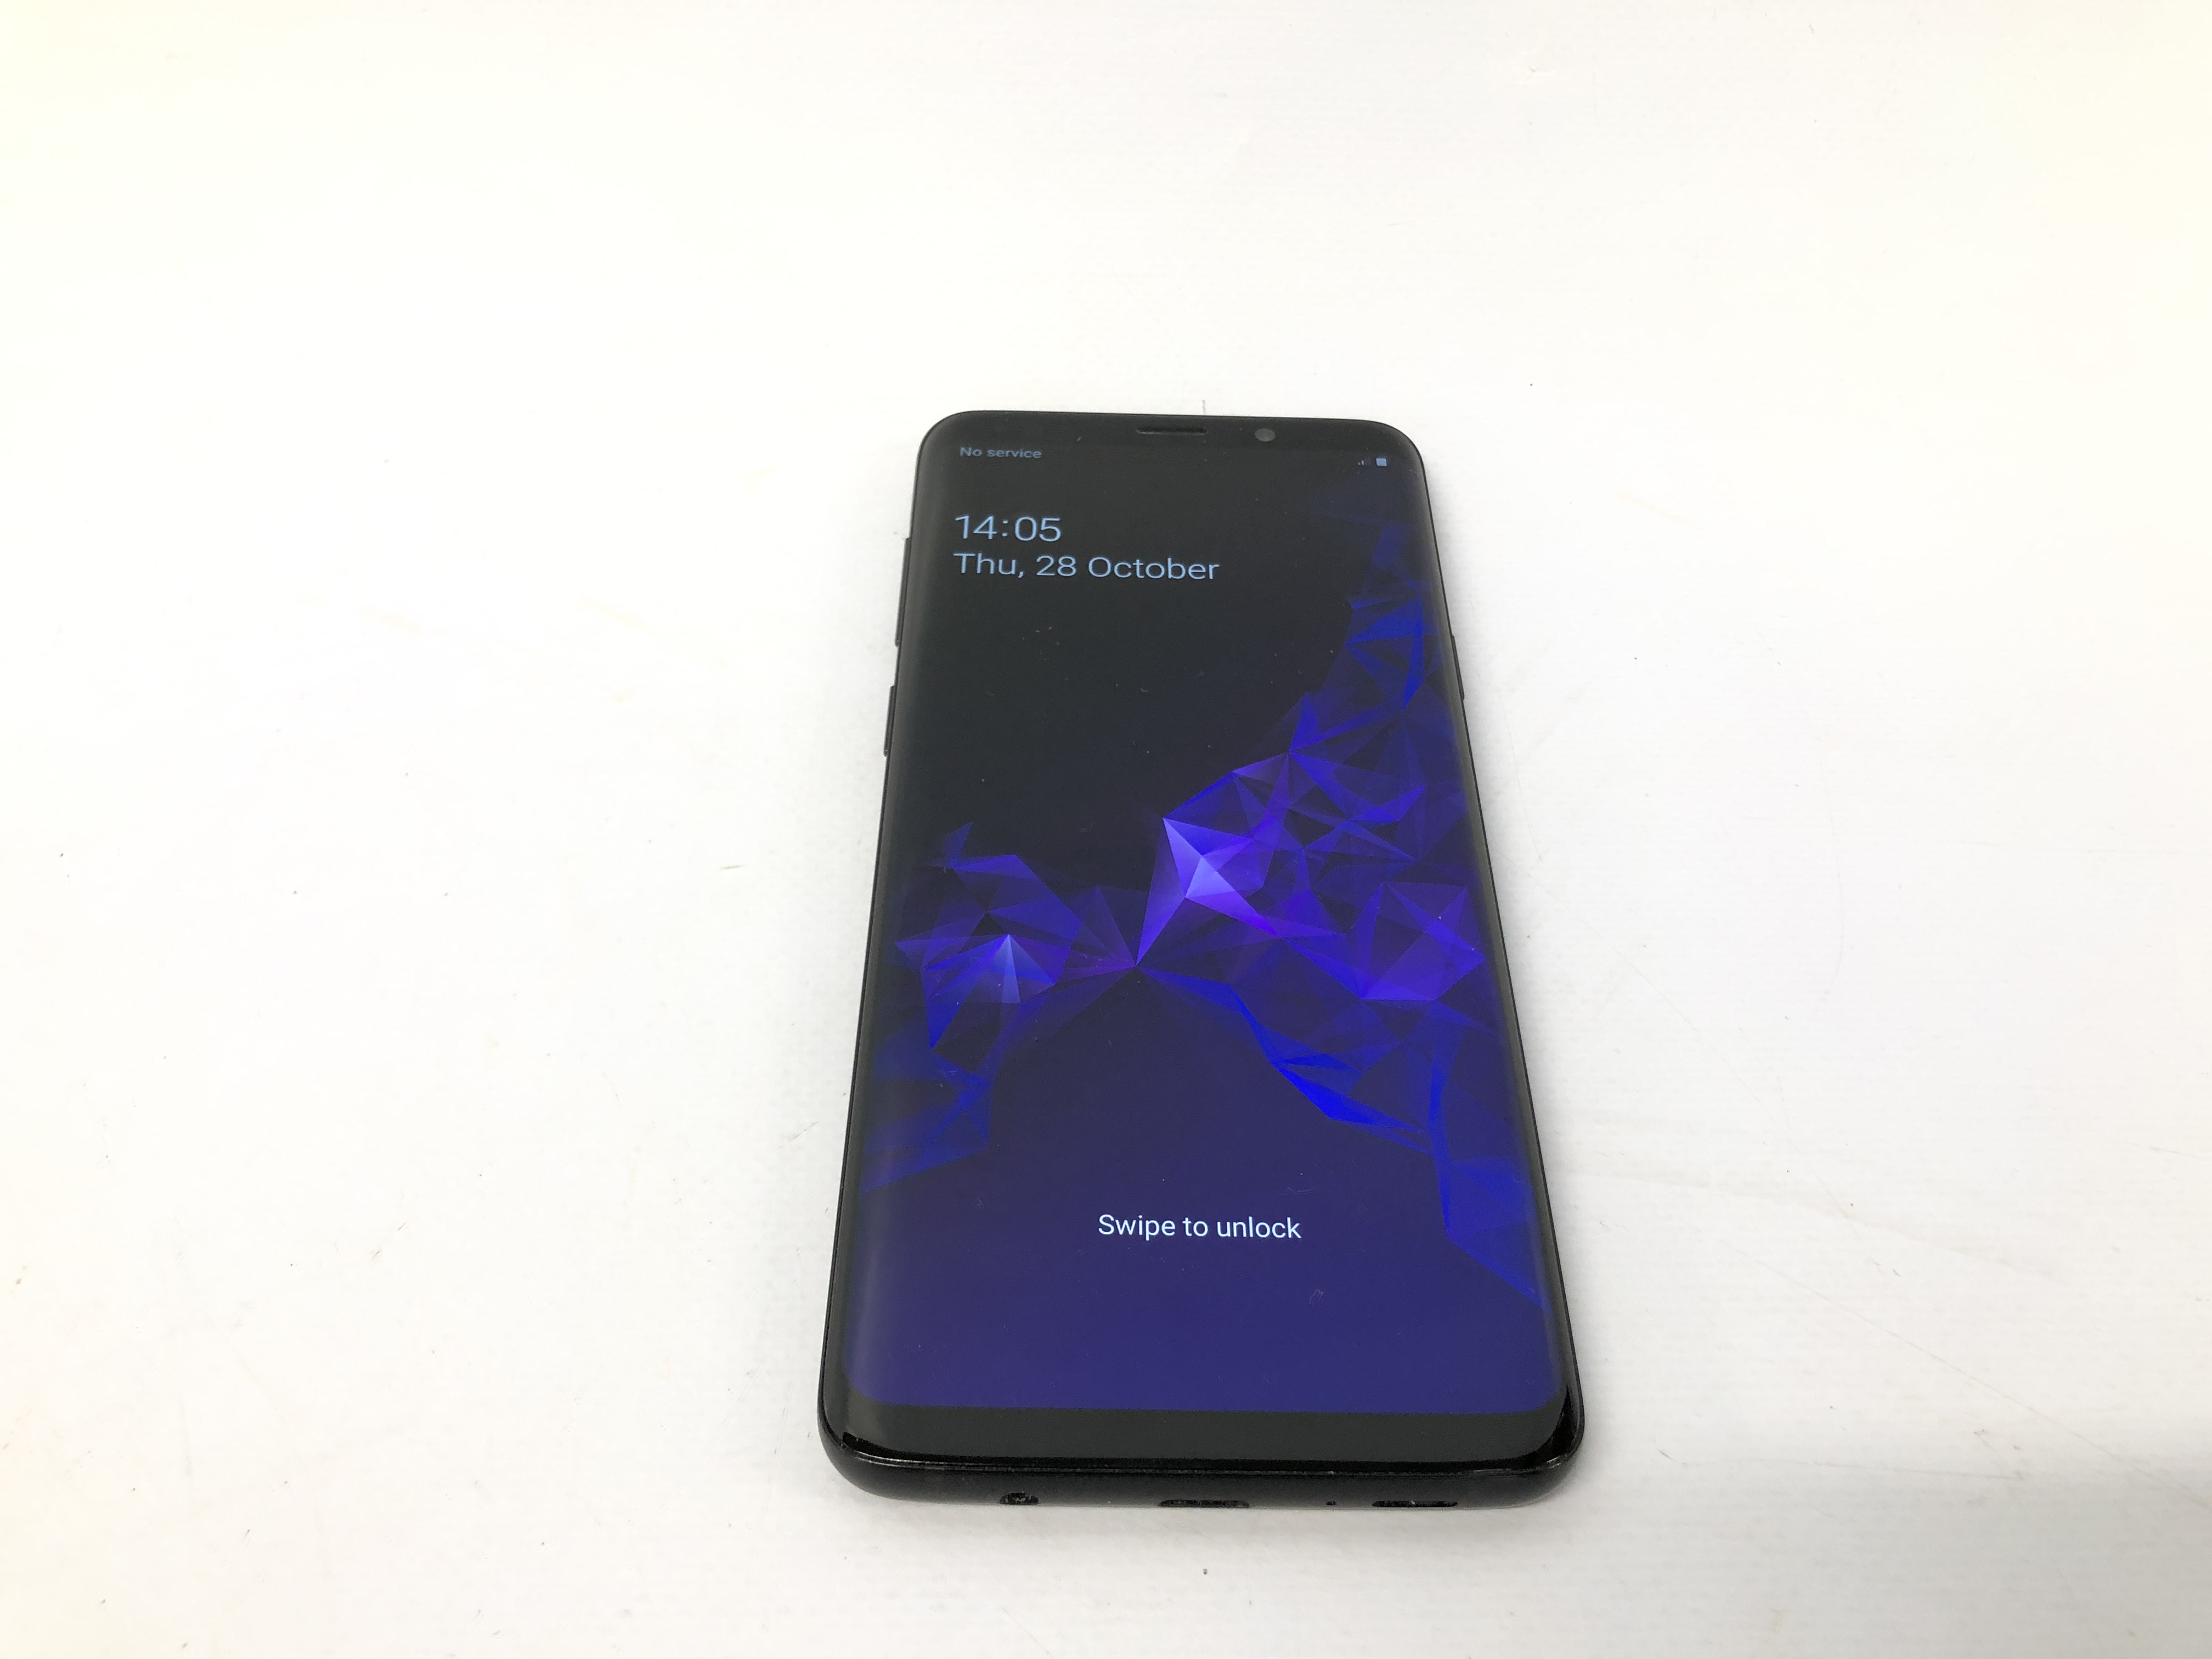 SAMSUNG GALAXY S9+ SMARTPHONE BOXED WITH ACCESSORIES 128GB MODEL SM-G965F - SOLD AS SEEN